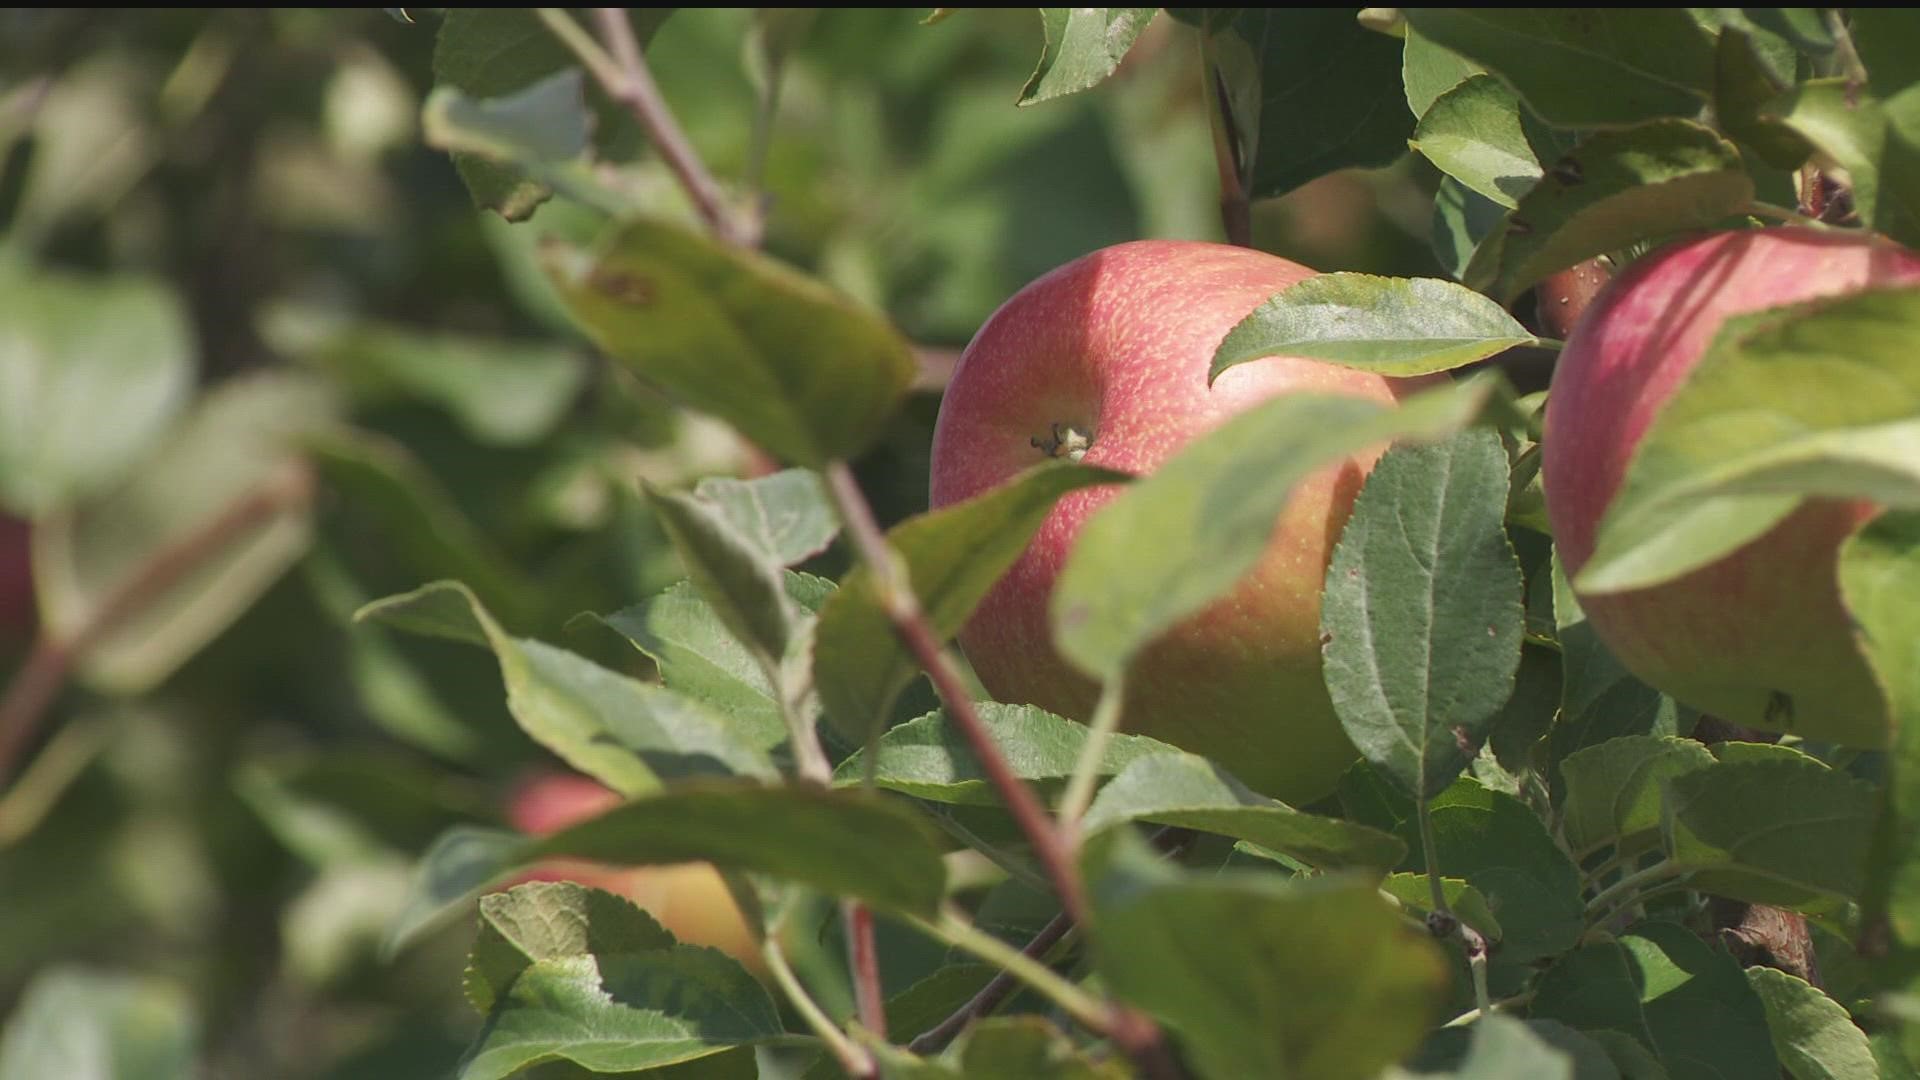 Some orchards say the cold spring and dry summer has delayed the ripening of some of their apples.